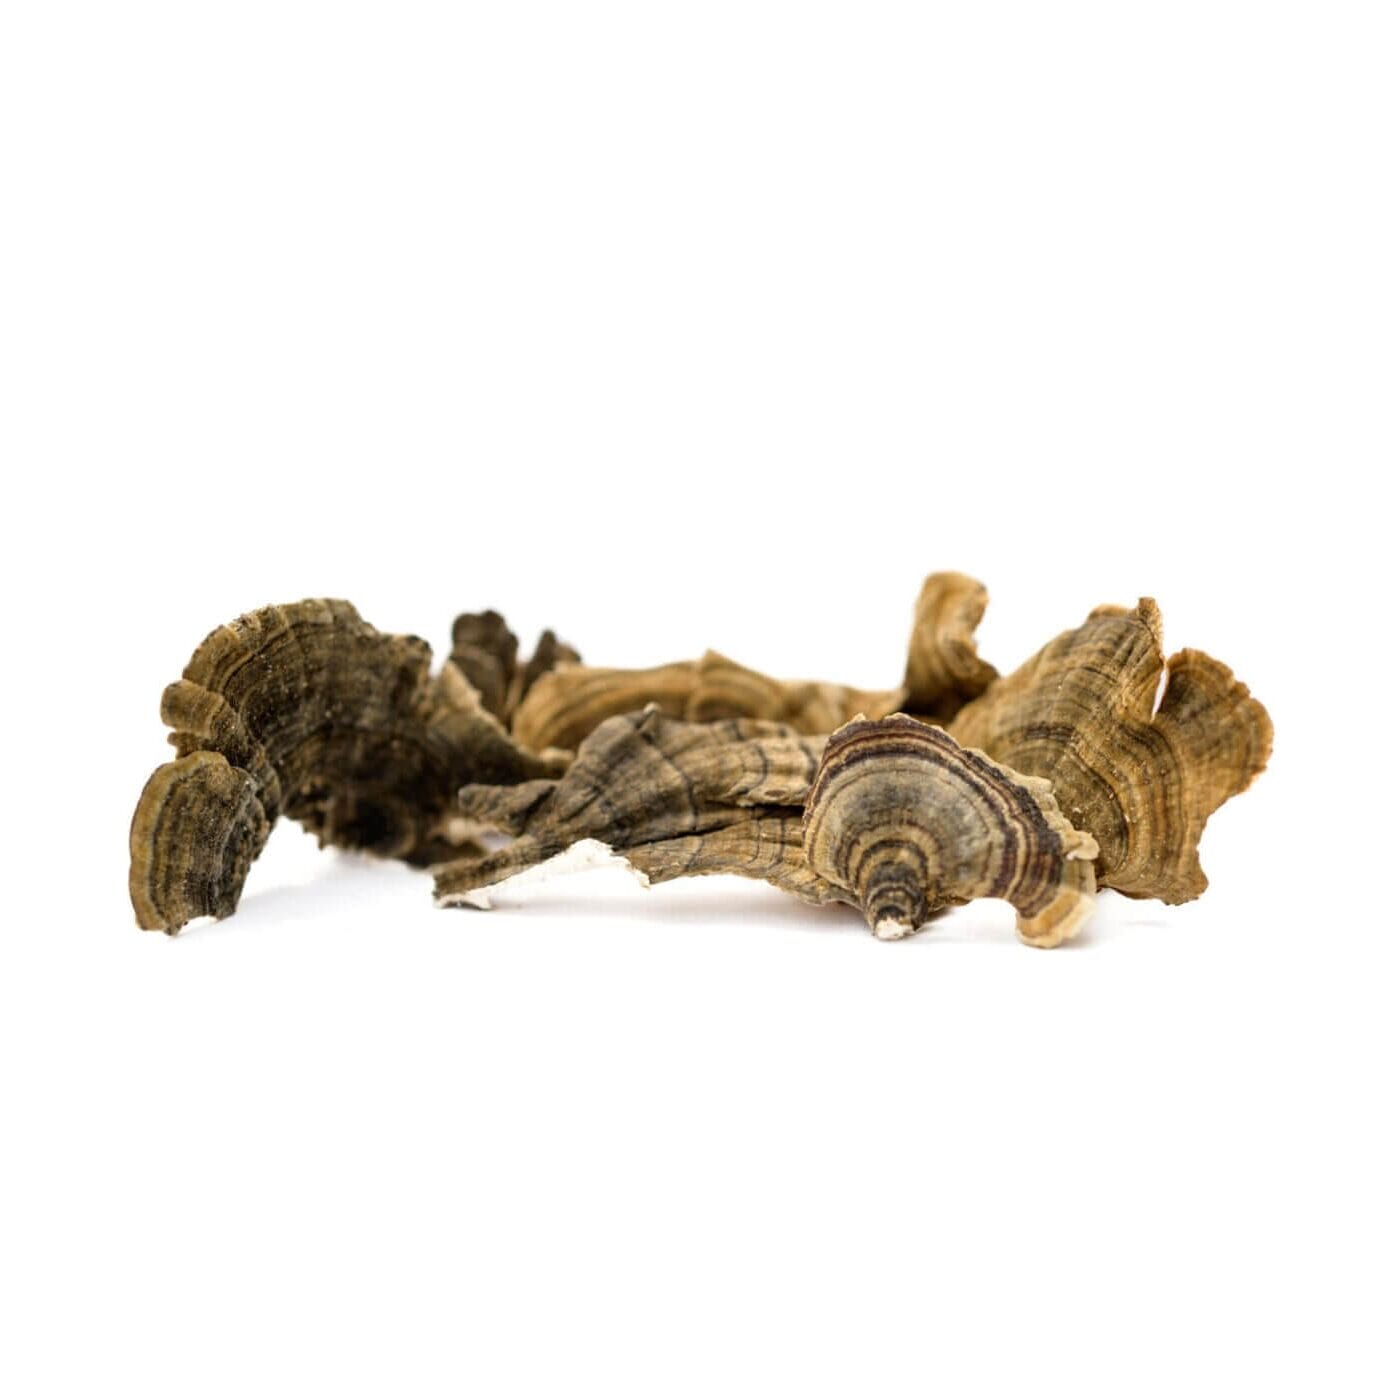 Turkey Tail mushroom for dogs and cats can improve dog & cat digestive system health along with enhanced immune function